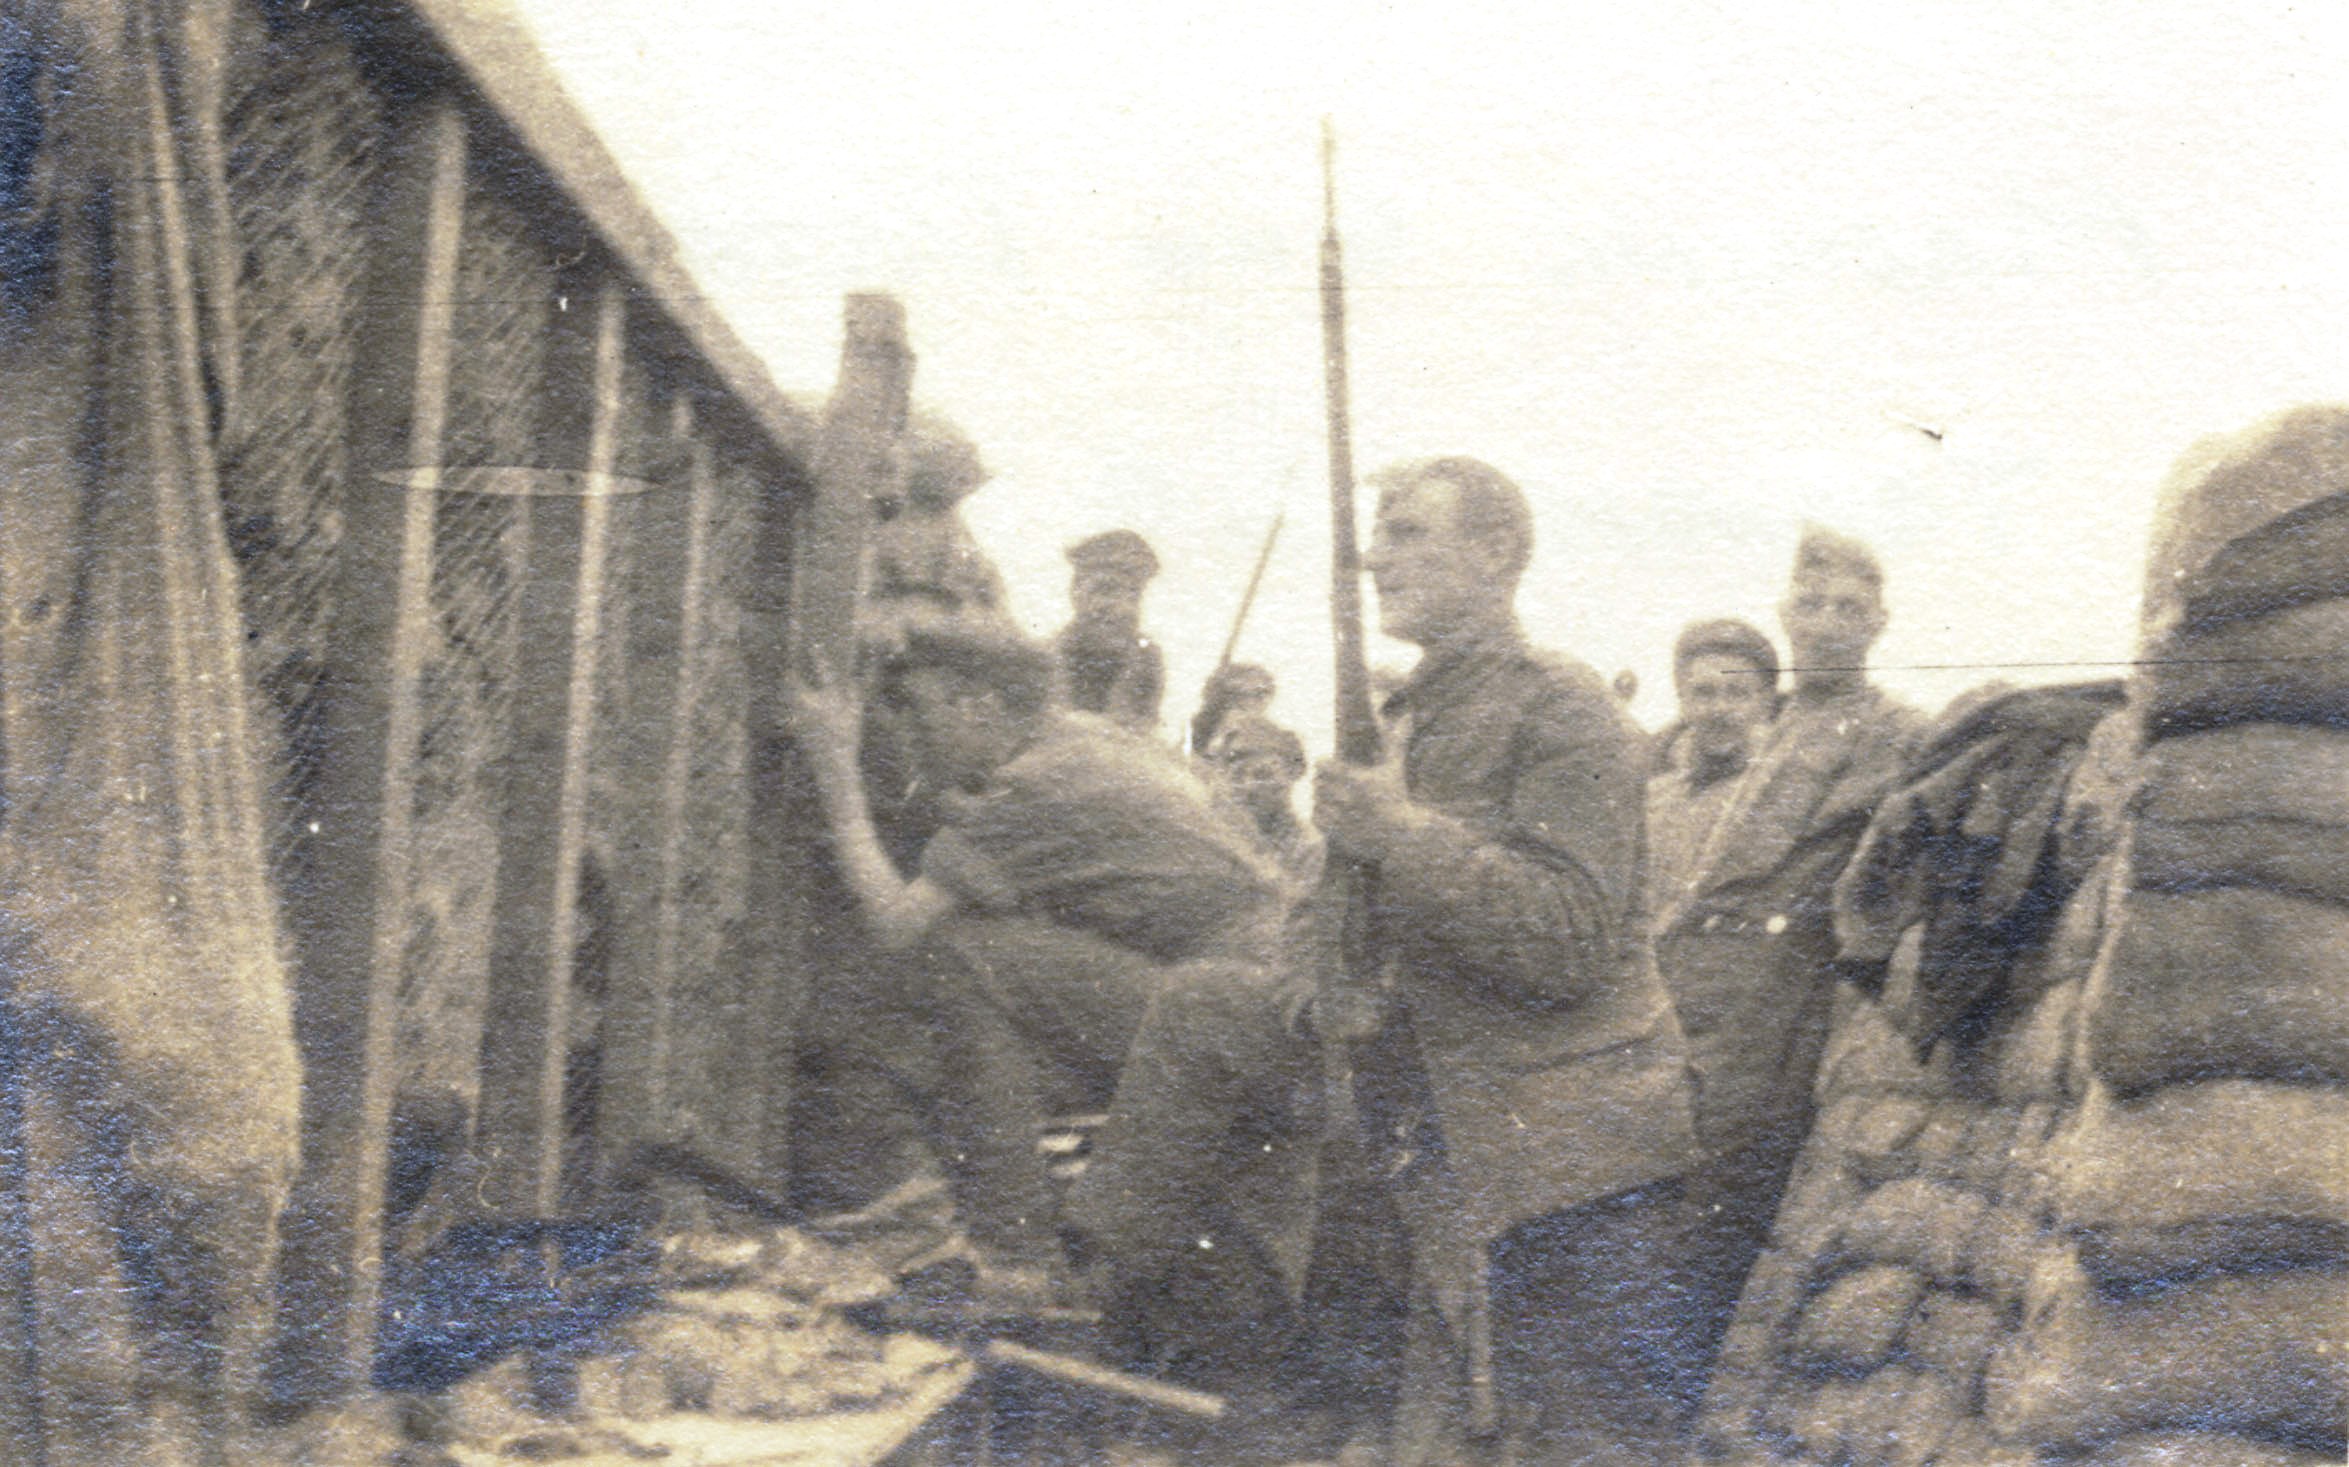 Photograph of soliders in a trench (NRO 06038/58)